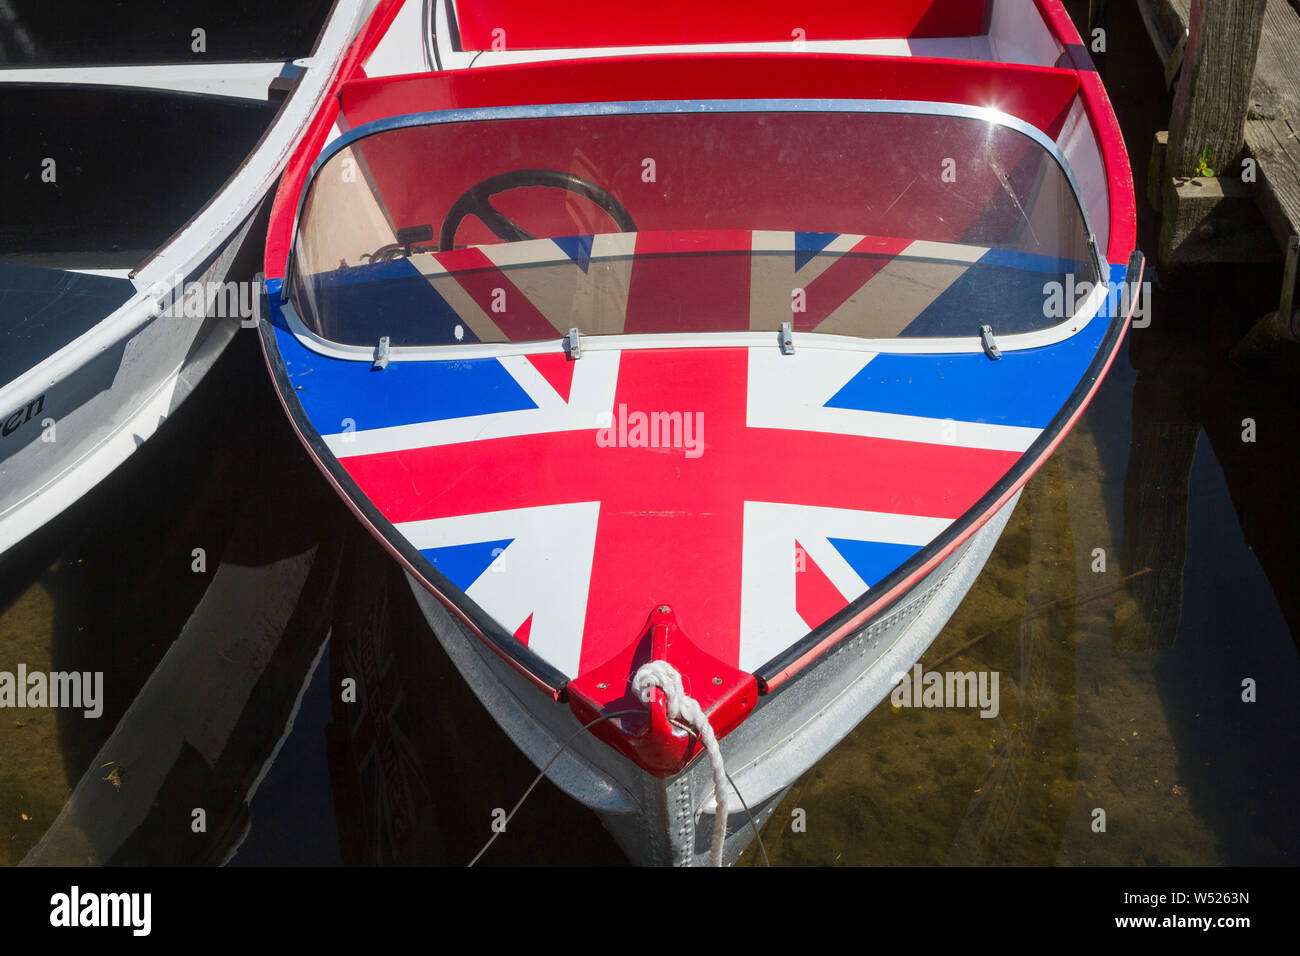 A colourful hire boat with Union Flag design at Henley-on-Thames, Oxfordshire Stock Photo